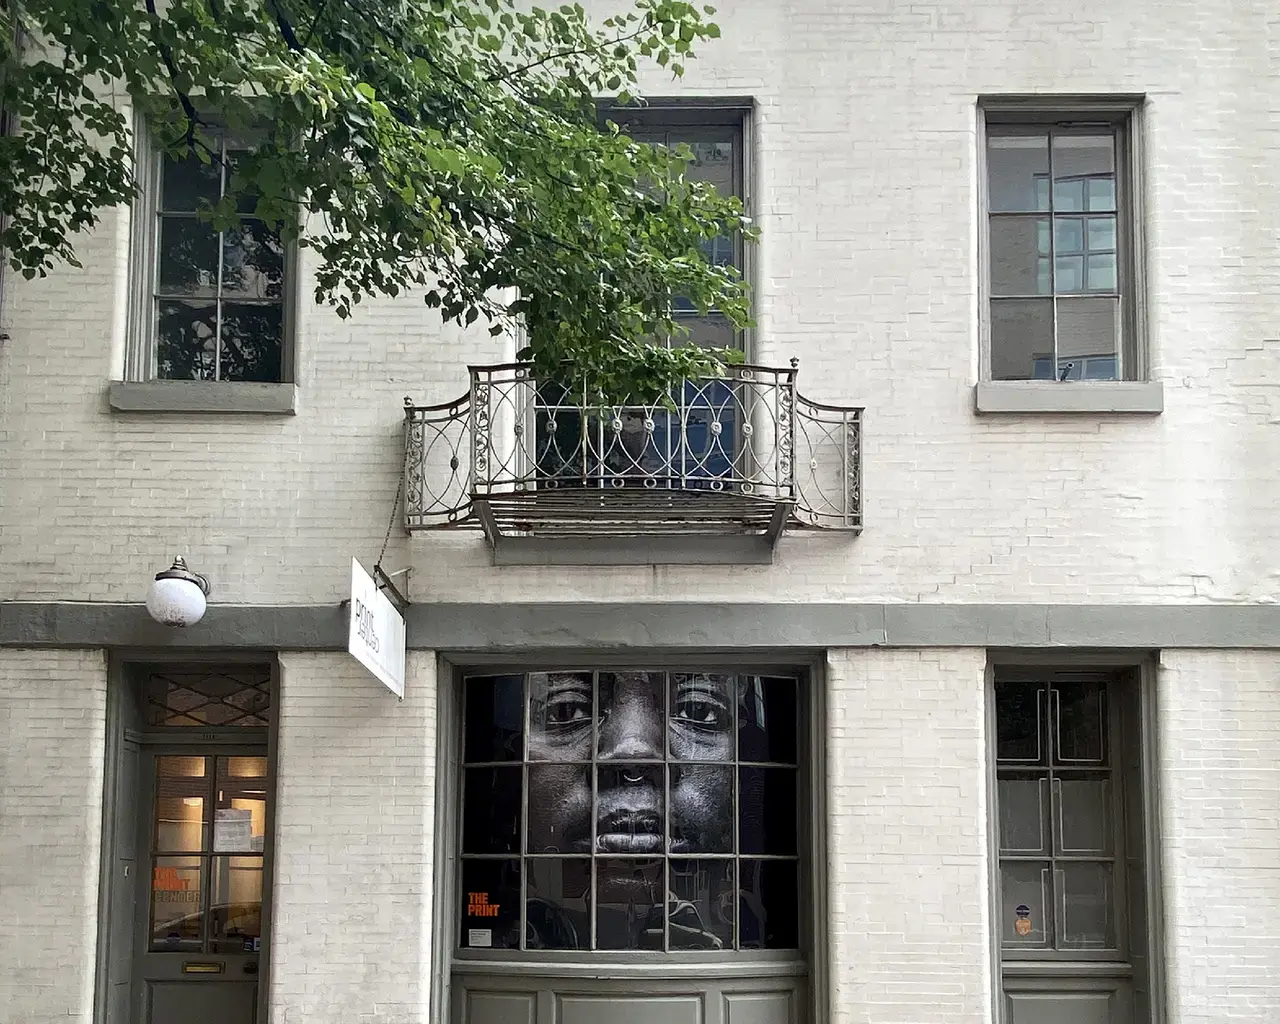 Exterior view of The Print Center in Philadelphia featuring the site-specific window installation I See You Not Seeing Me (2020) by Shawn Theodore. Photo courtesy of The Print Center.